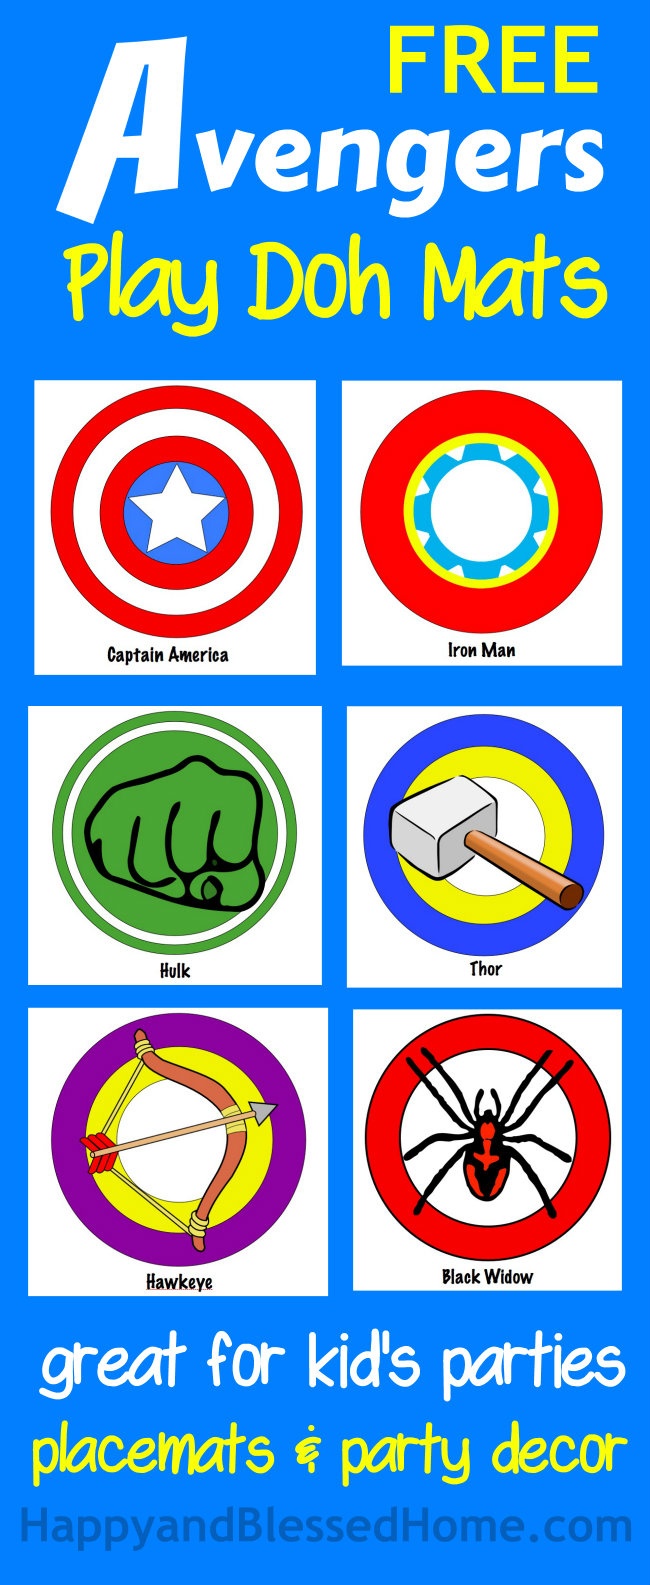 Free Avengers Printables And New Avengers Super Heroes Assemble App - Free Avengers Birthday Party Printables